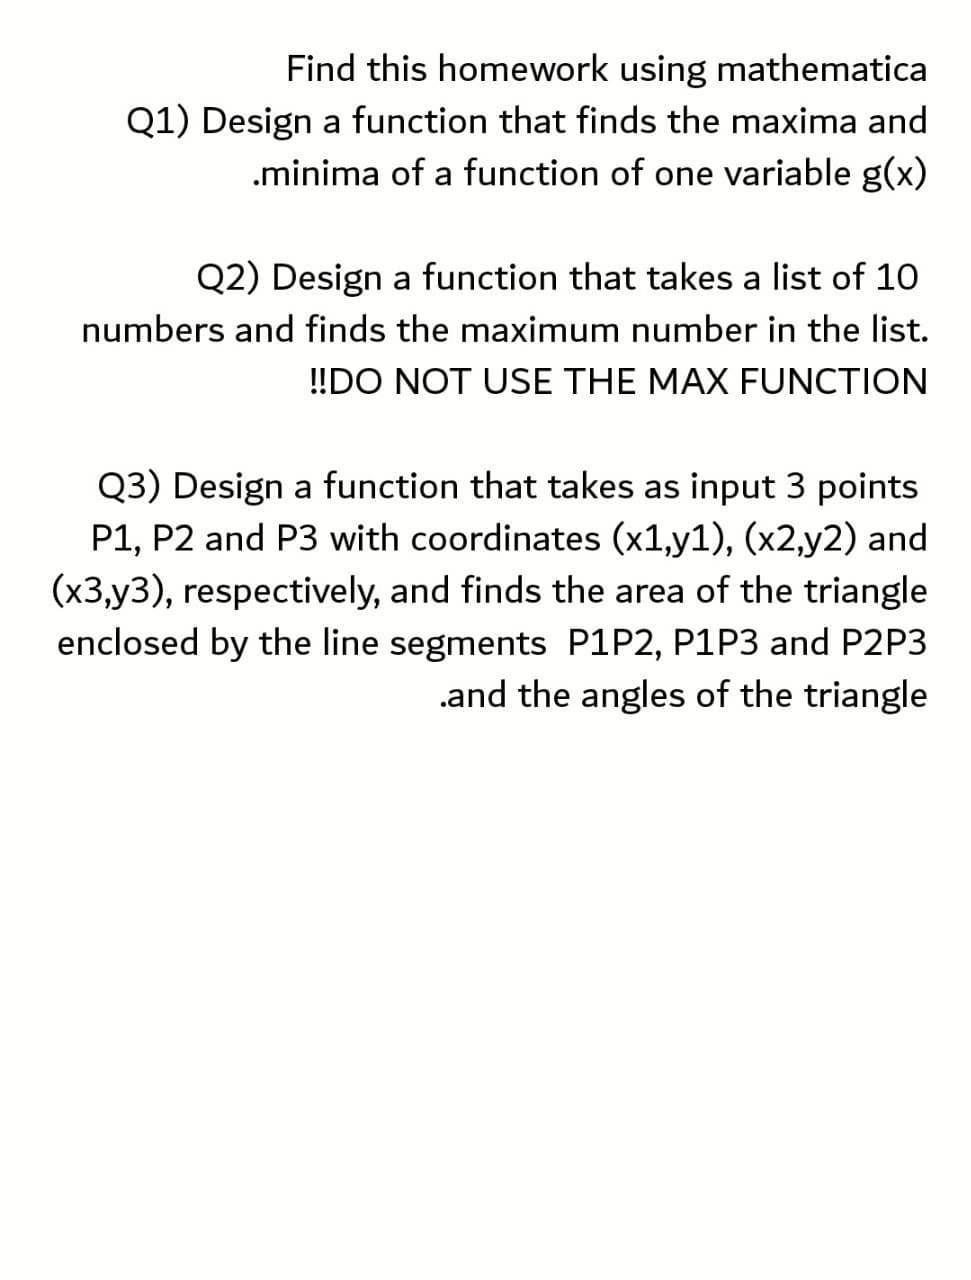 Find this homework using mathematica
Q1) Design a function that finds the maxima and
.minima of a function of one variable g(x)
Q2) Design a function that takes a list of 10
numbers and finds the maximum number in the list.
!!DO NOT USE THE MAX FUNCTION
Q3) Design a function that takes as input 3 points
P1, P2 and P3 with coordinates (x1,y1), (x2,y2) and
(x3,y3), respectively, and finds the area of the triangle
enclosed by the line segments P1P2, P1P3 and P2P3
.and the angles of the triangle
